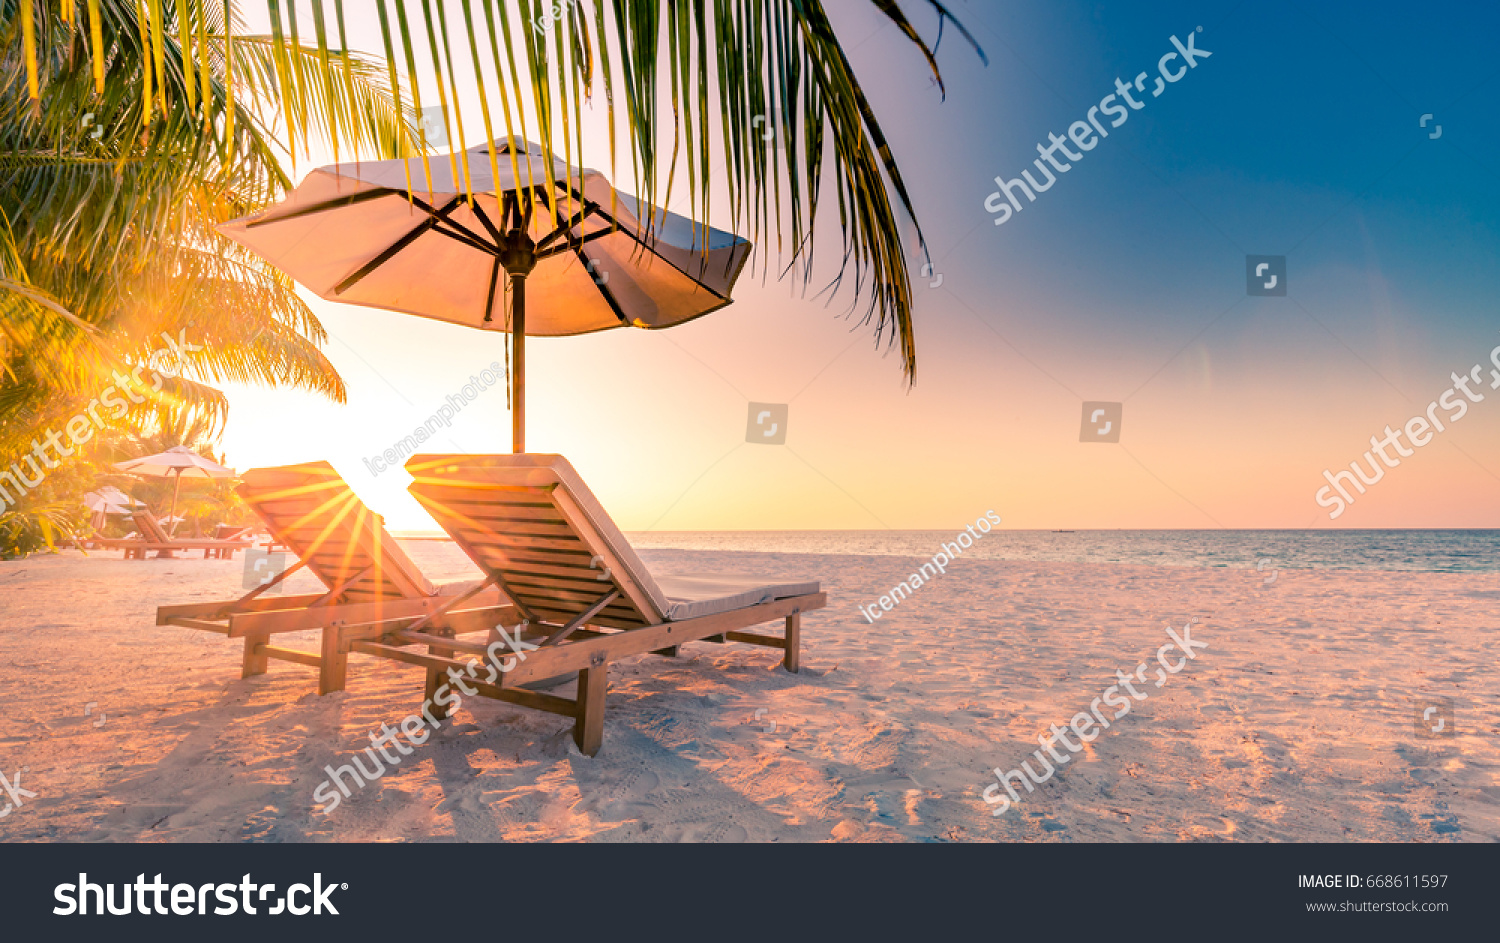 Summer holiday and vacation design. Inspirational tropical beach, palm trees and white sand. Tranquil scenery moody travel landscape #668611597